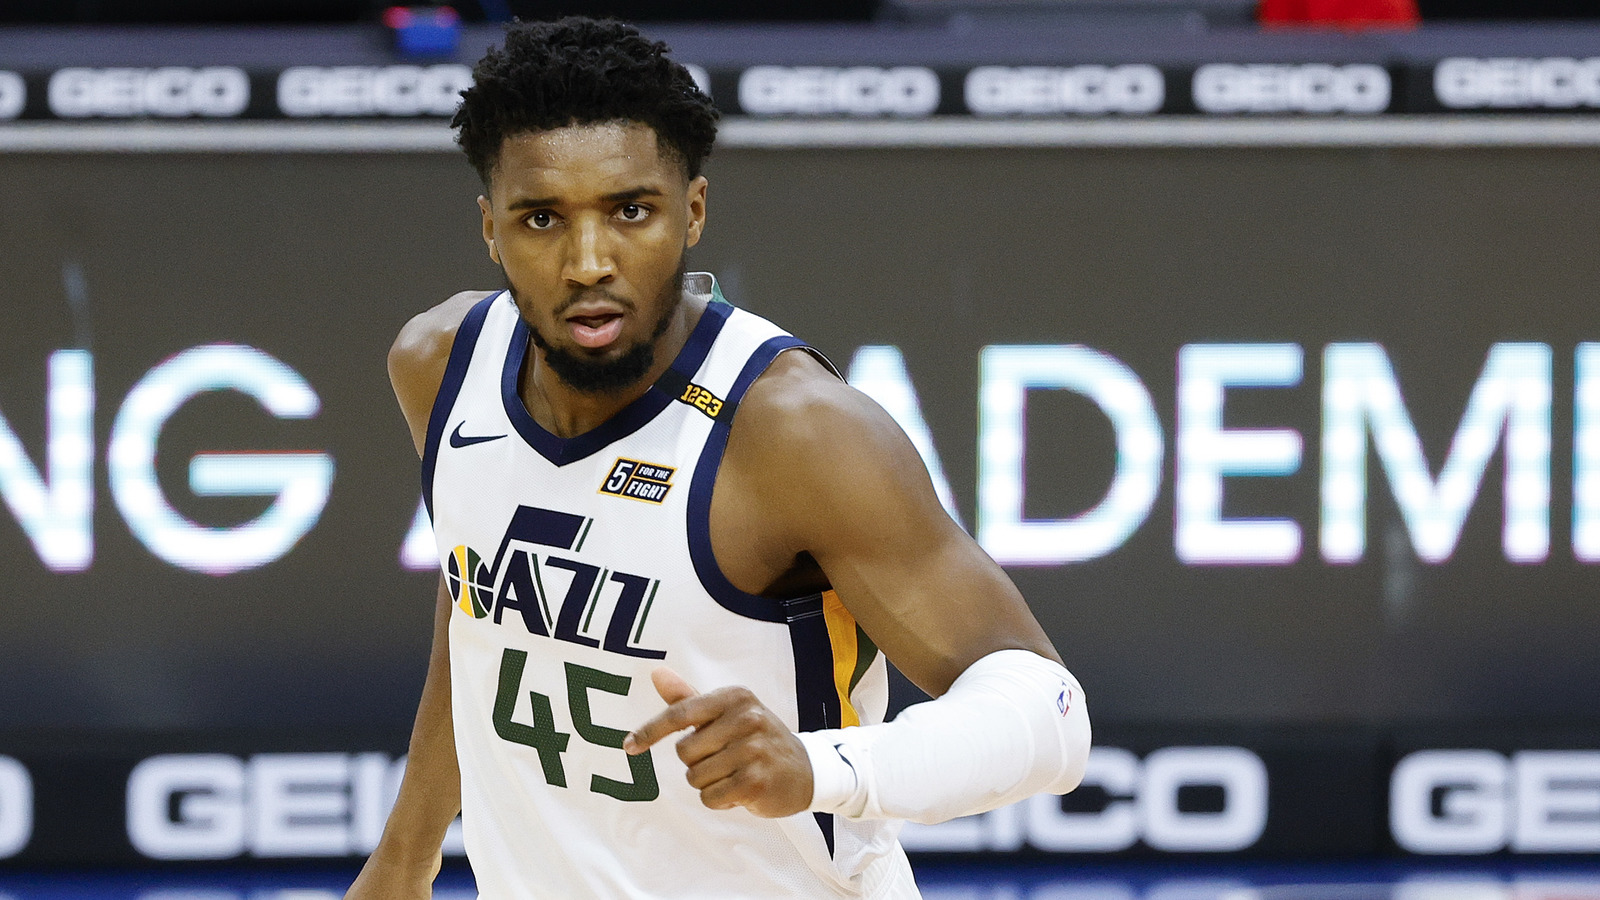 Details You Should Know About NBA All-Star Donovan Mitchell